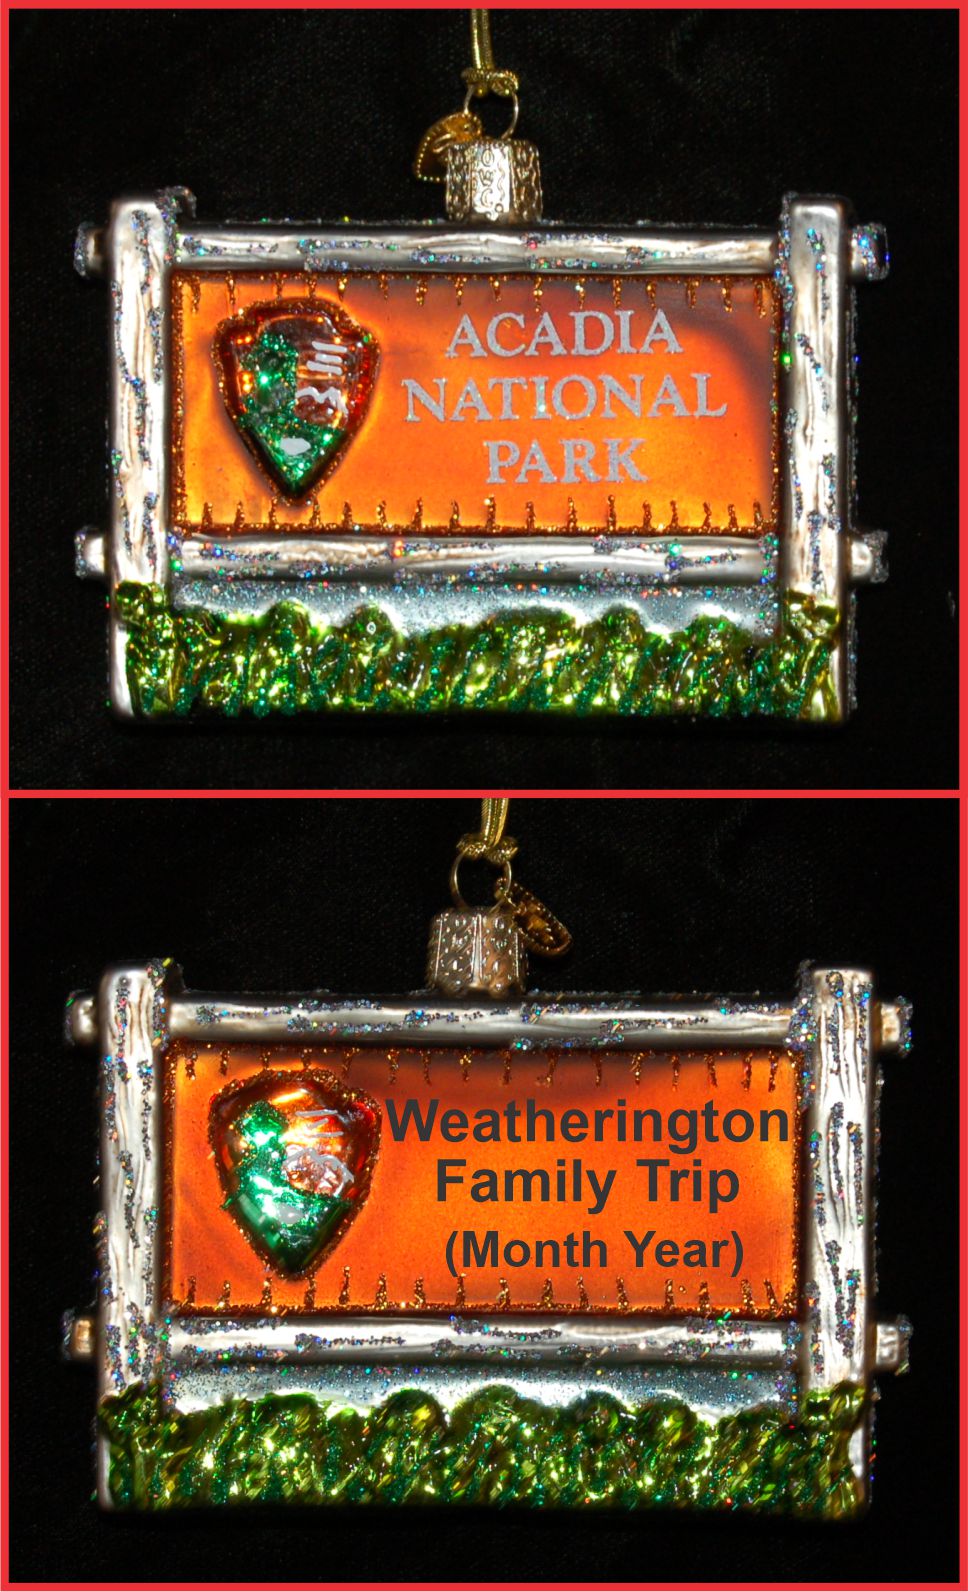 Acadia National Park Christmas Ornament Personalized by RussellRhodes.com